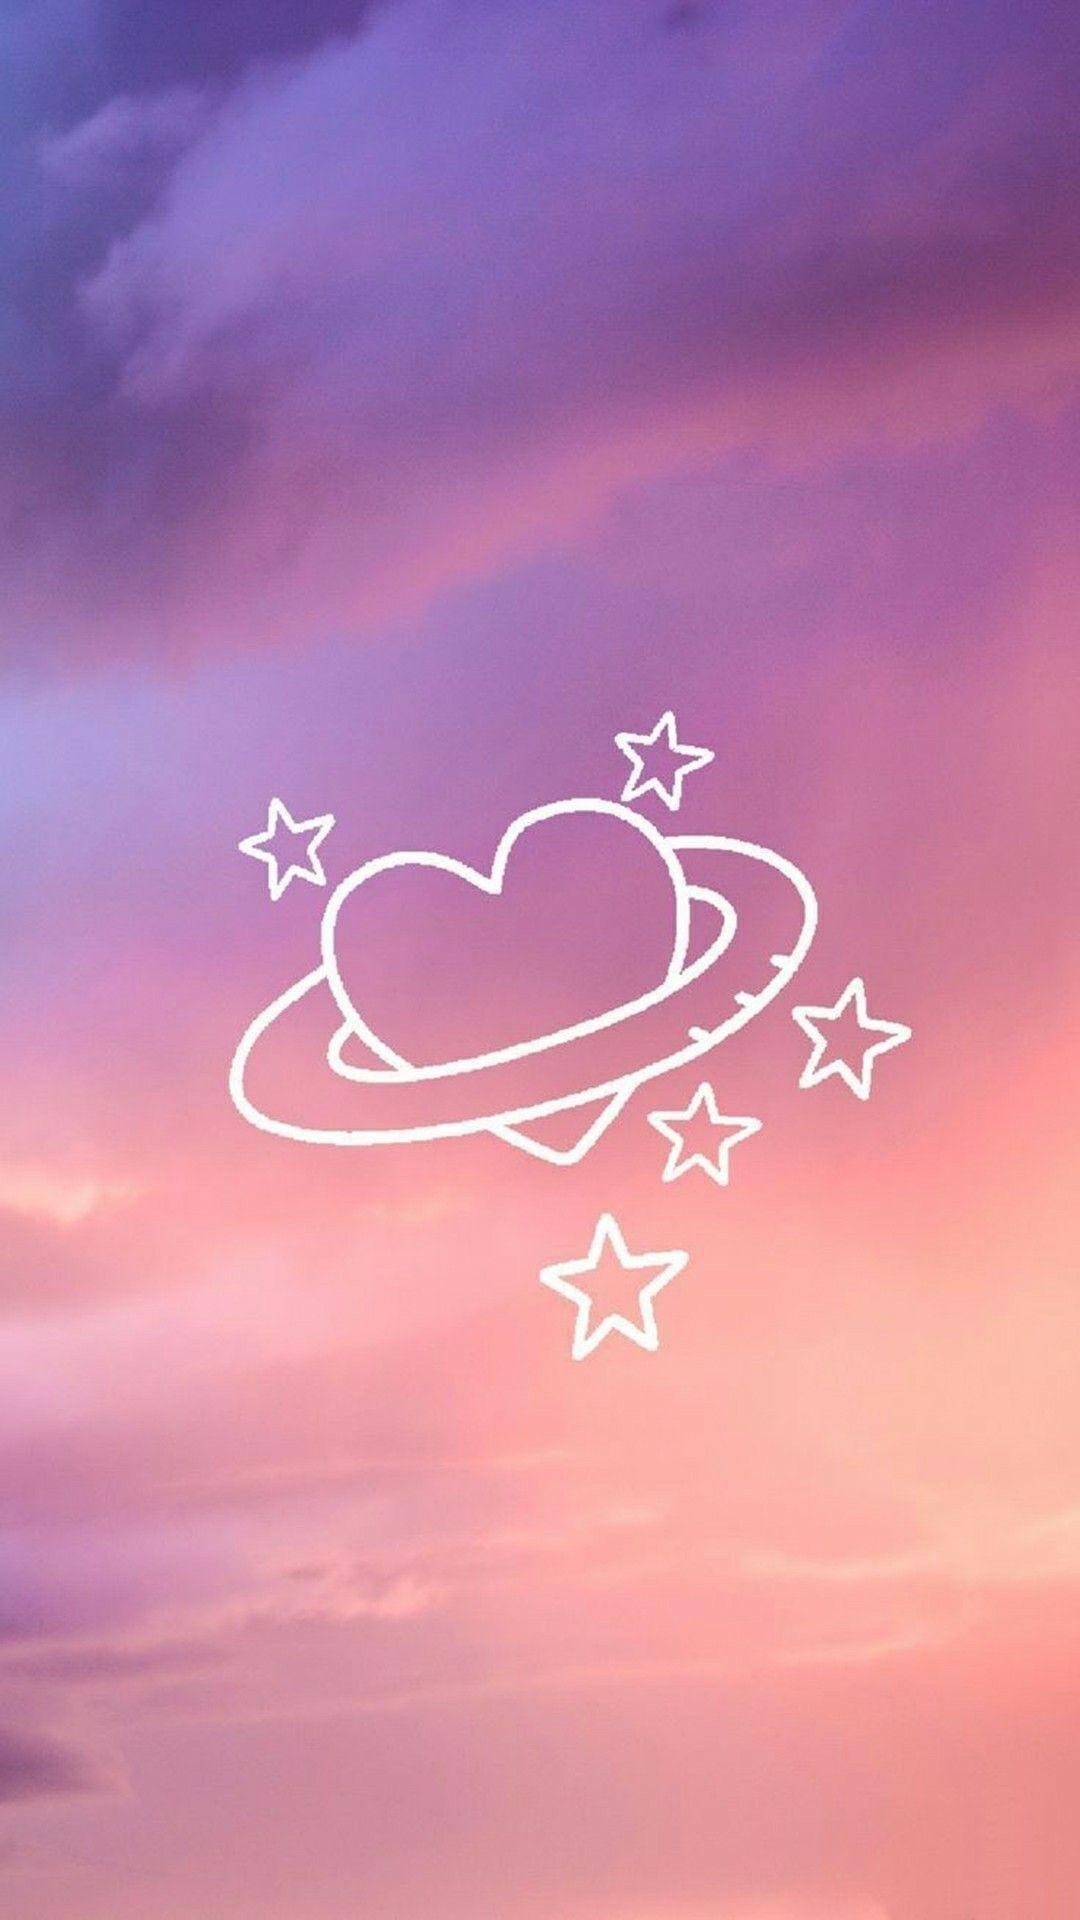 Clouds Heart Aesthetic Wallpapers  Clouds Aesthetic Wallpapers